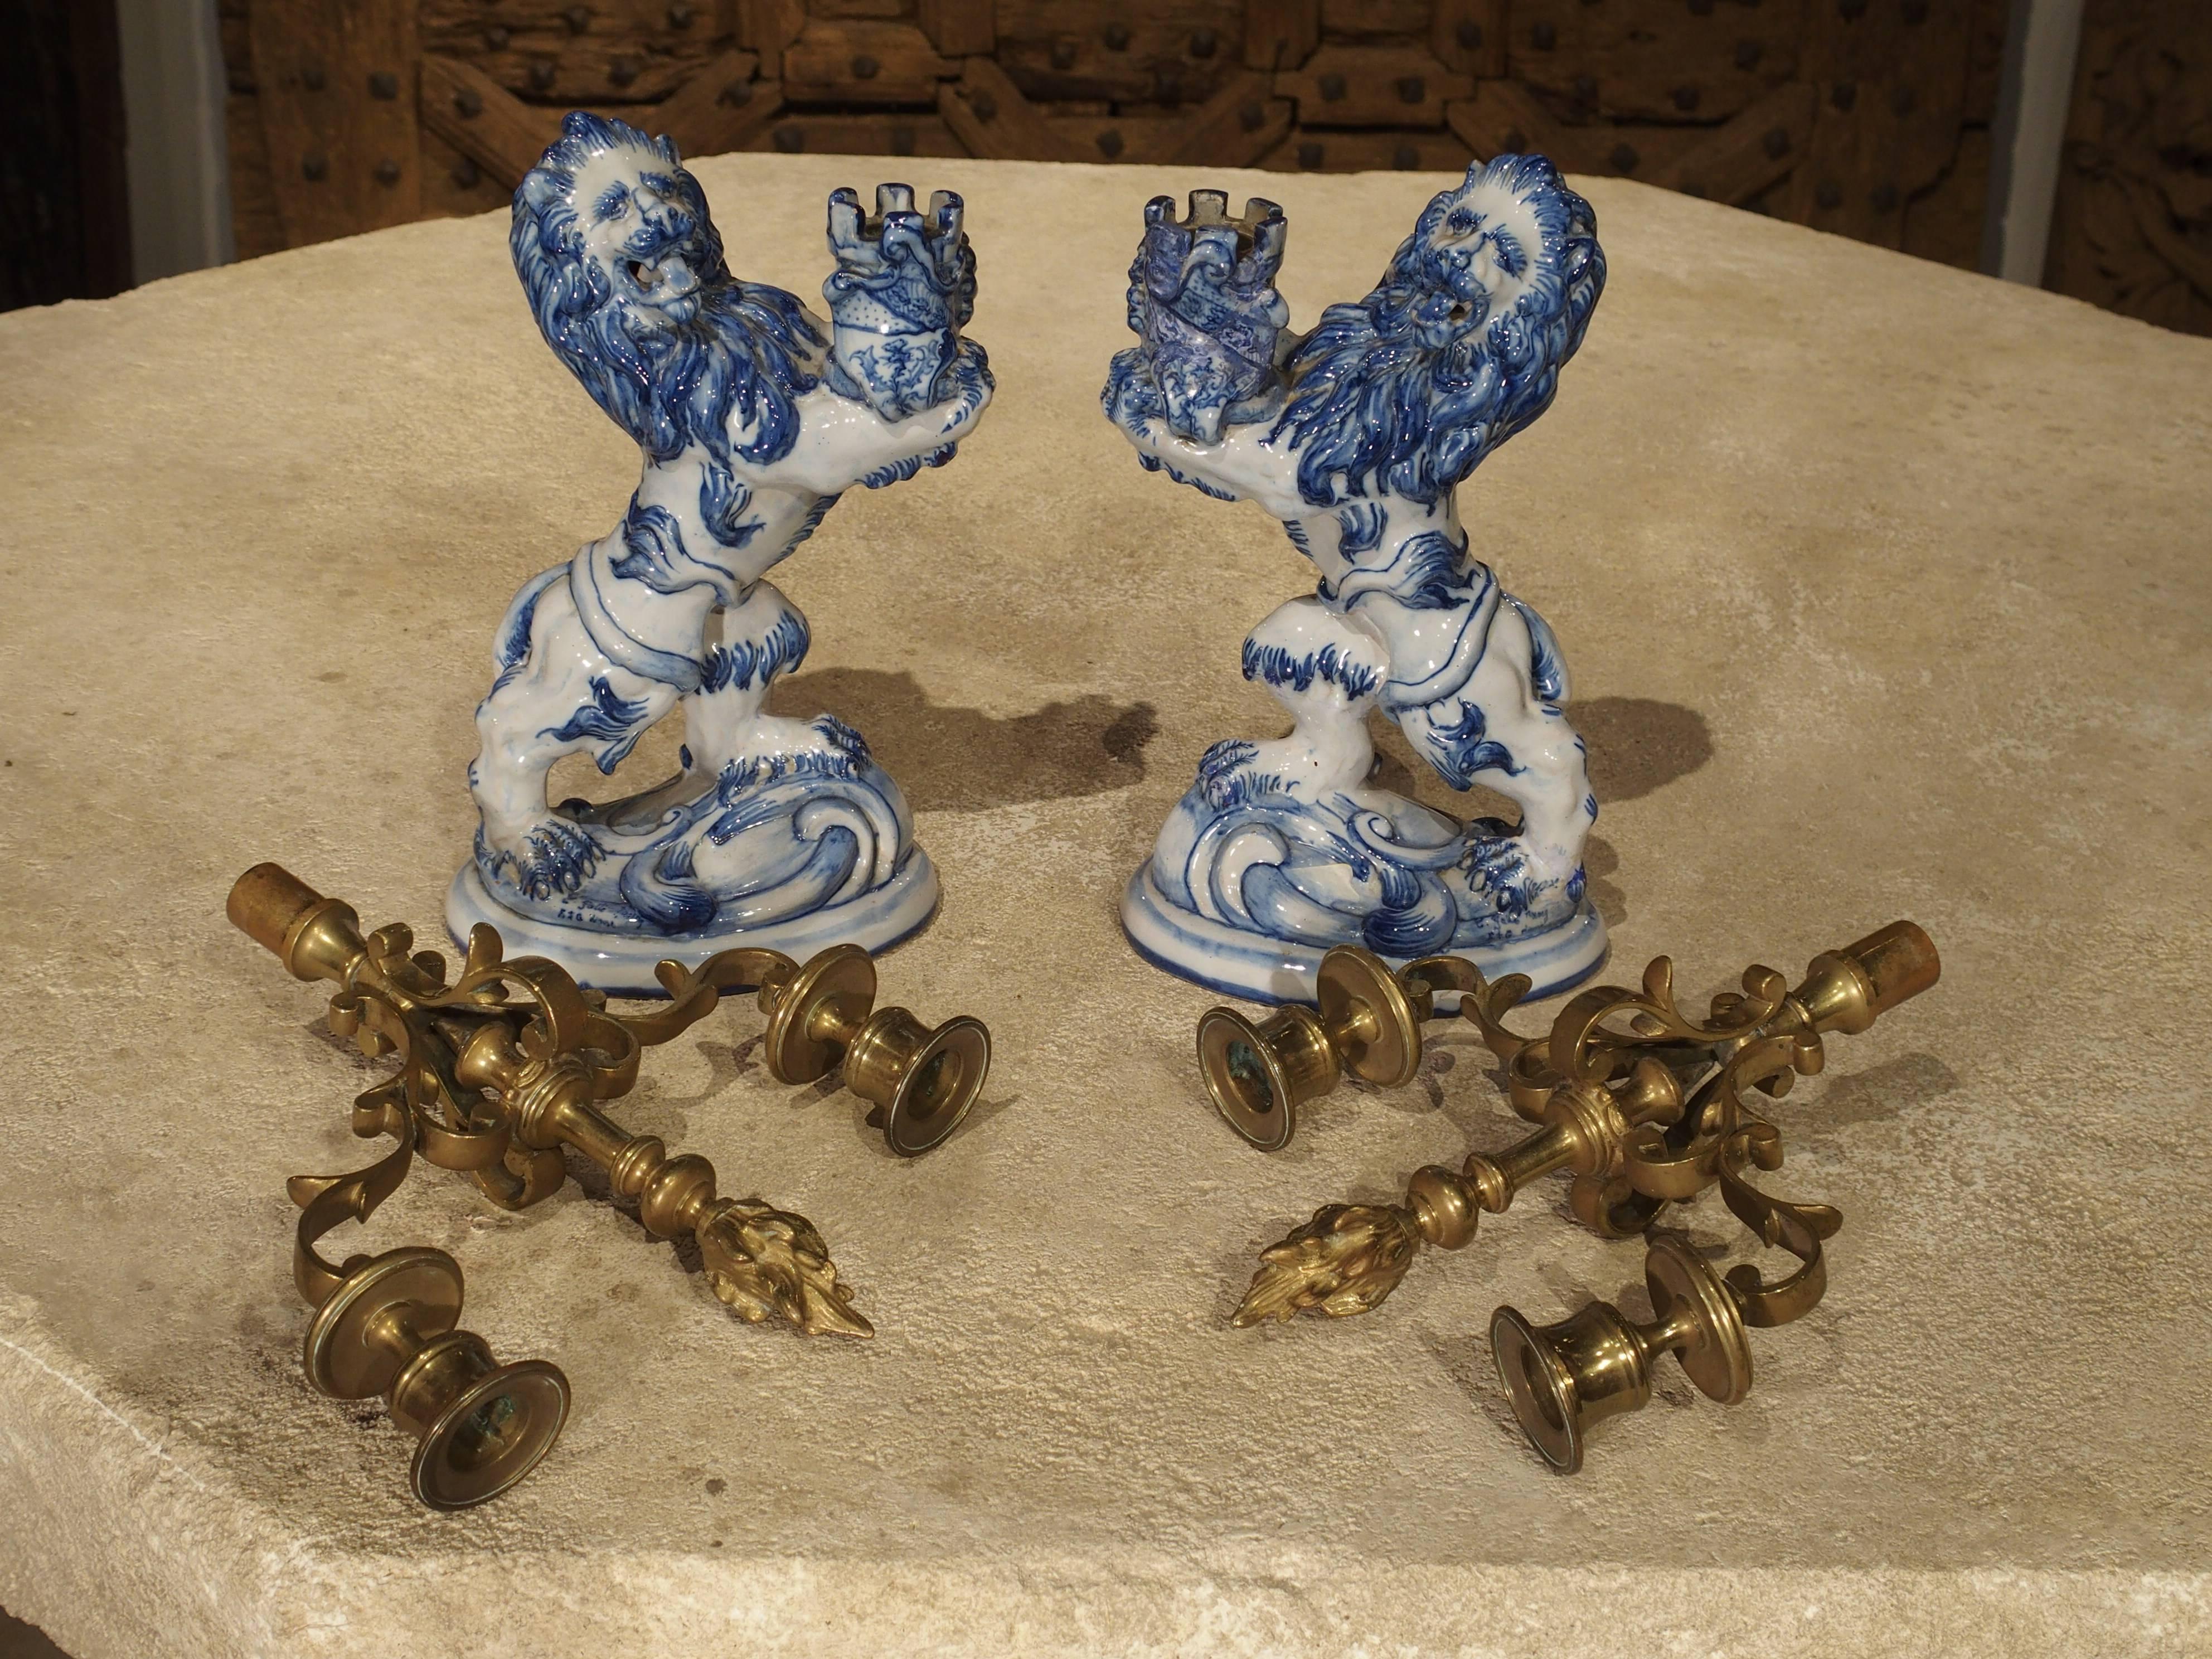 Pair of Late 1800s Emille Galle Faience Lion Candleholders from France 2